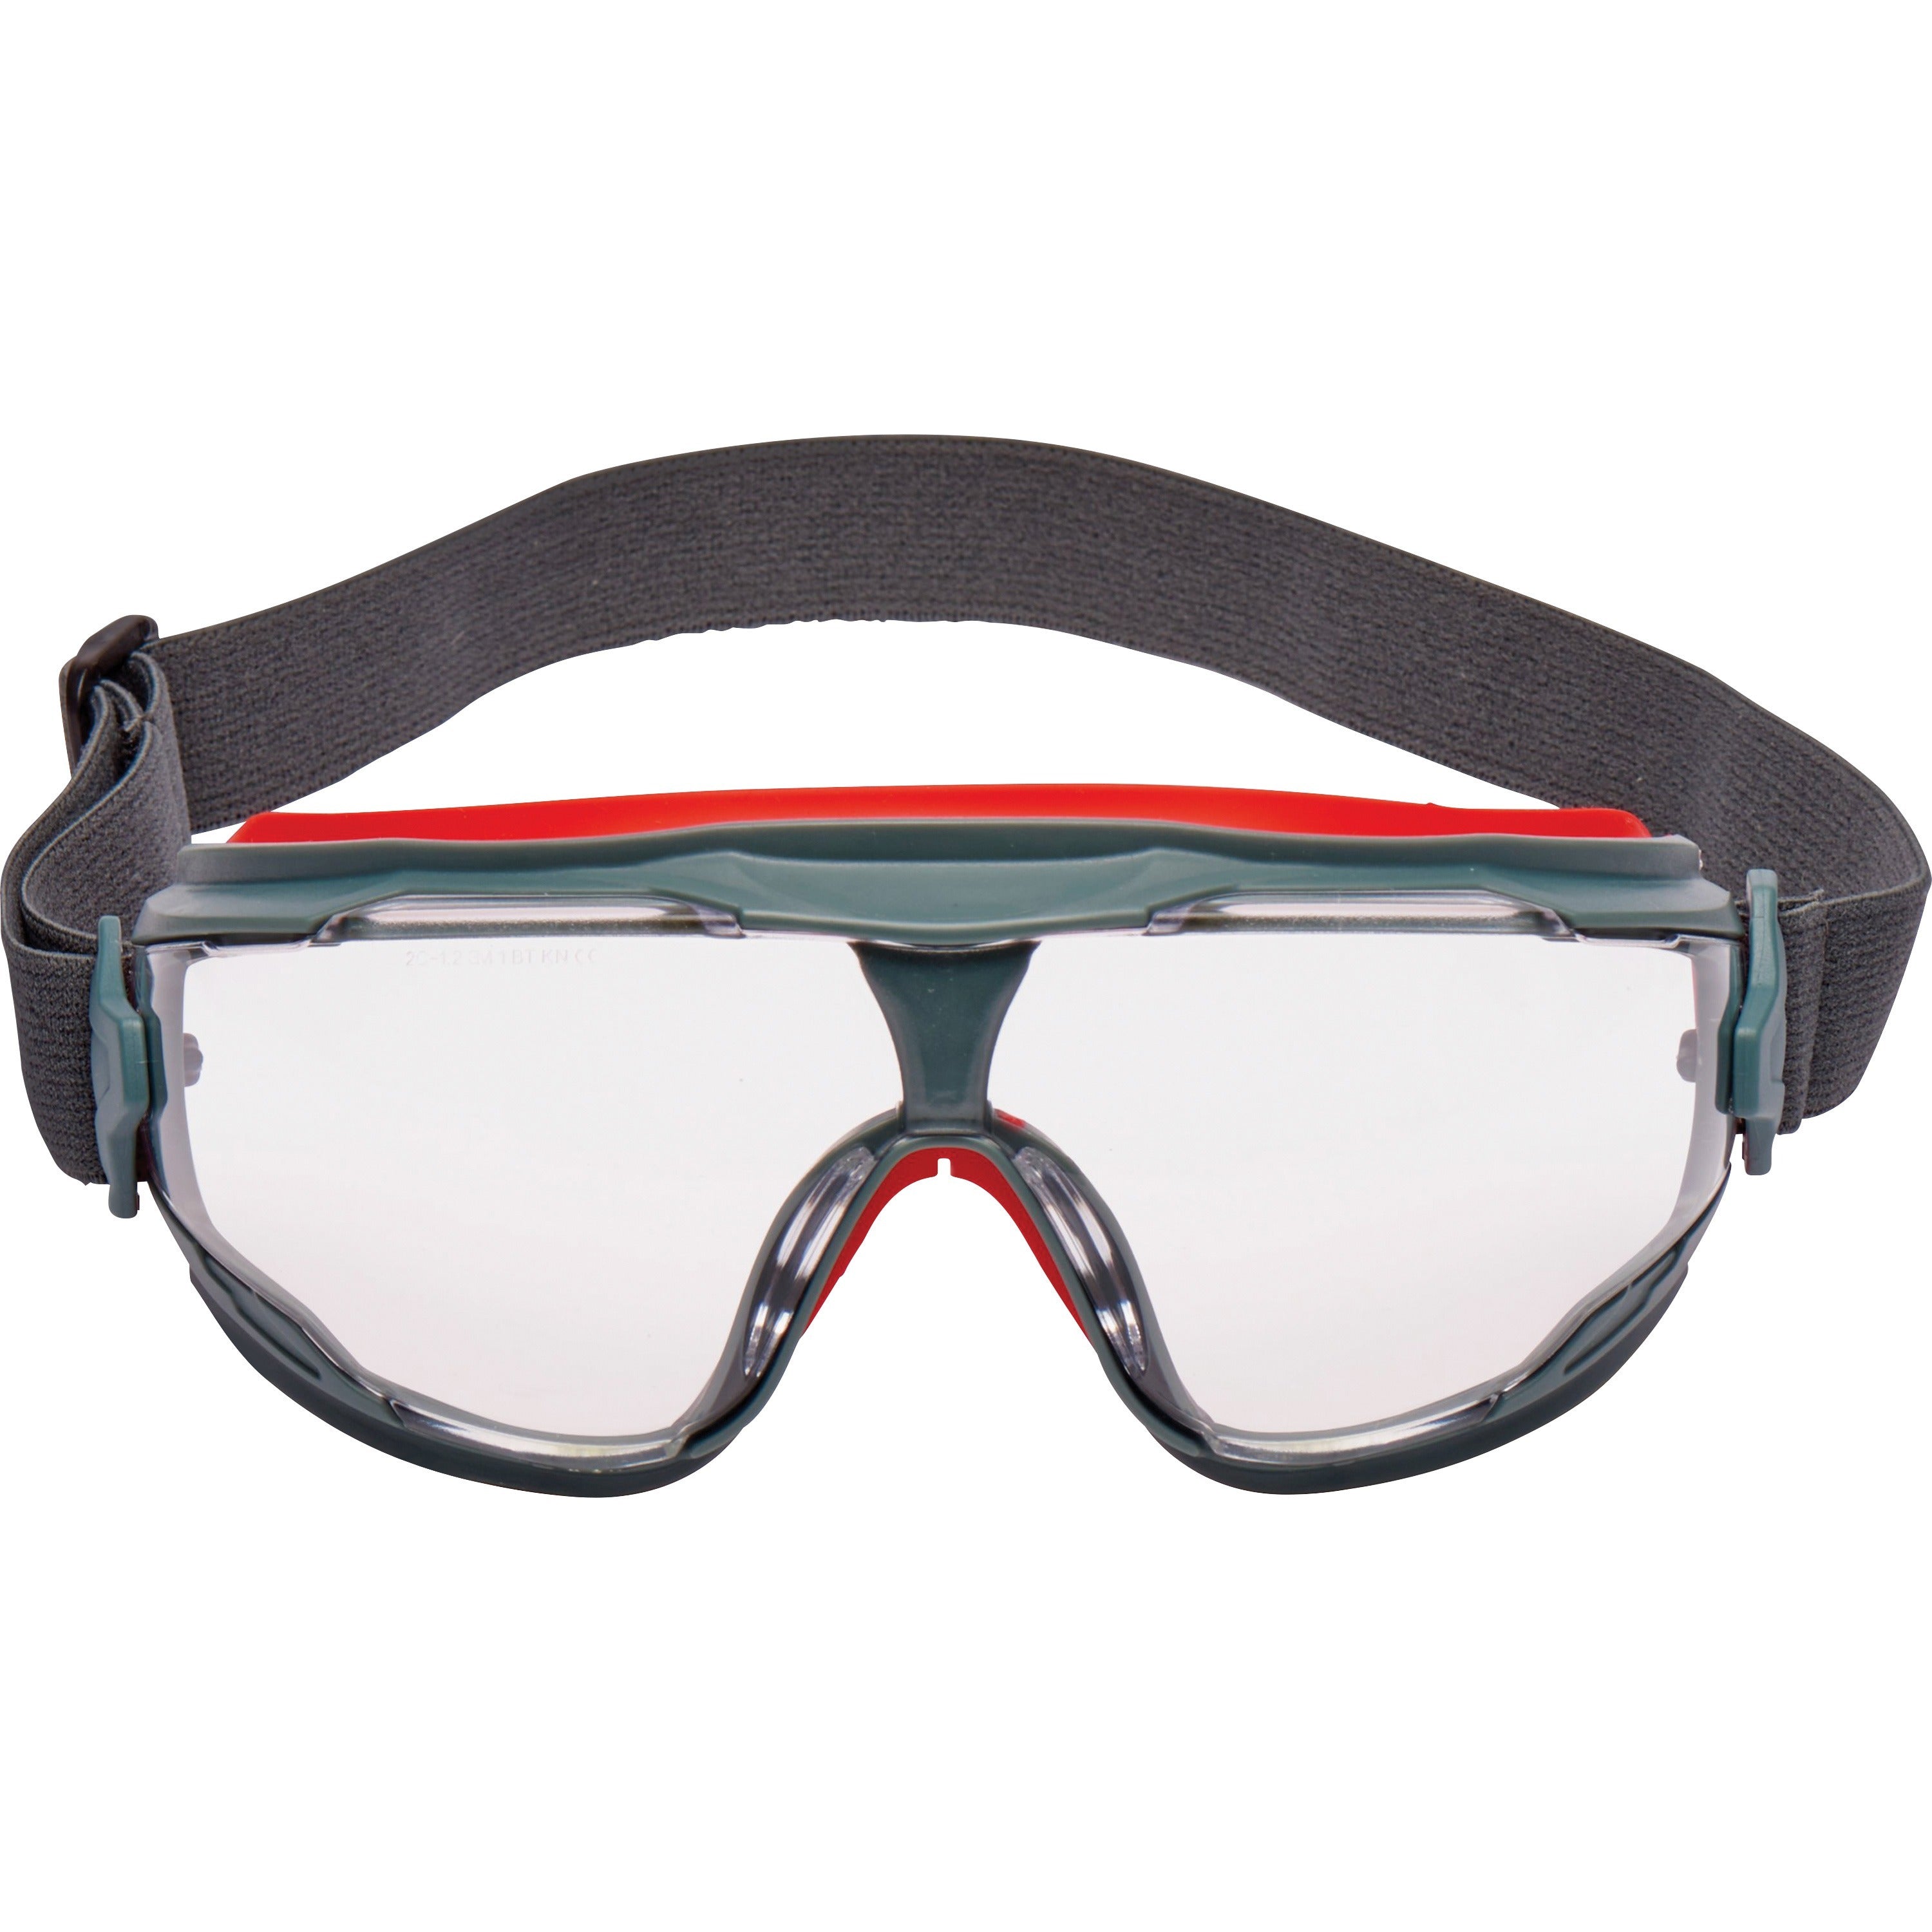 3m-gogglegear-500-series-scotchgard-anti-fog-goggles-recommended-for-eye-splash-ultraviolet-ultraviolet-protection-clear-lens-gray-frame-1-each_mmmgg501sgaf - 1